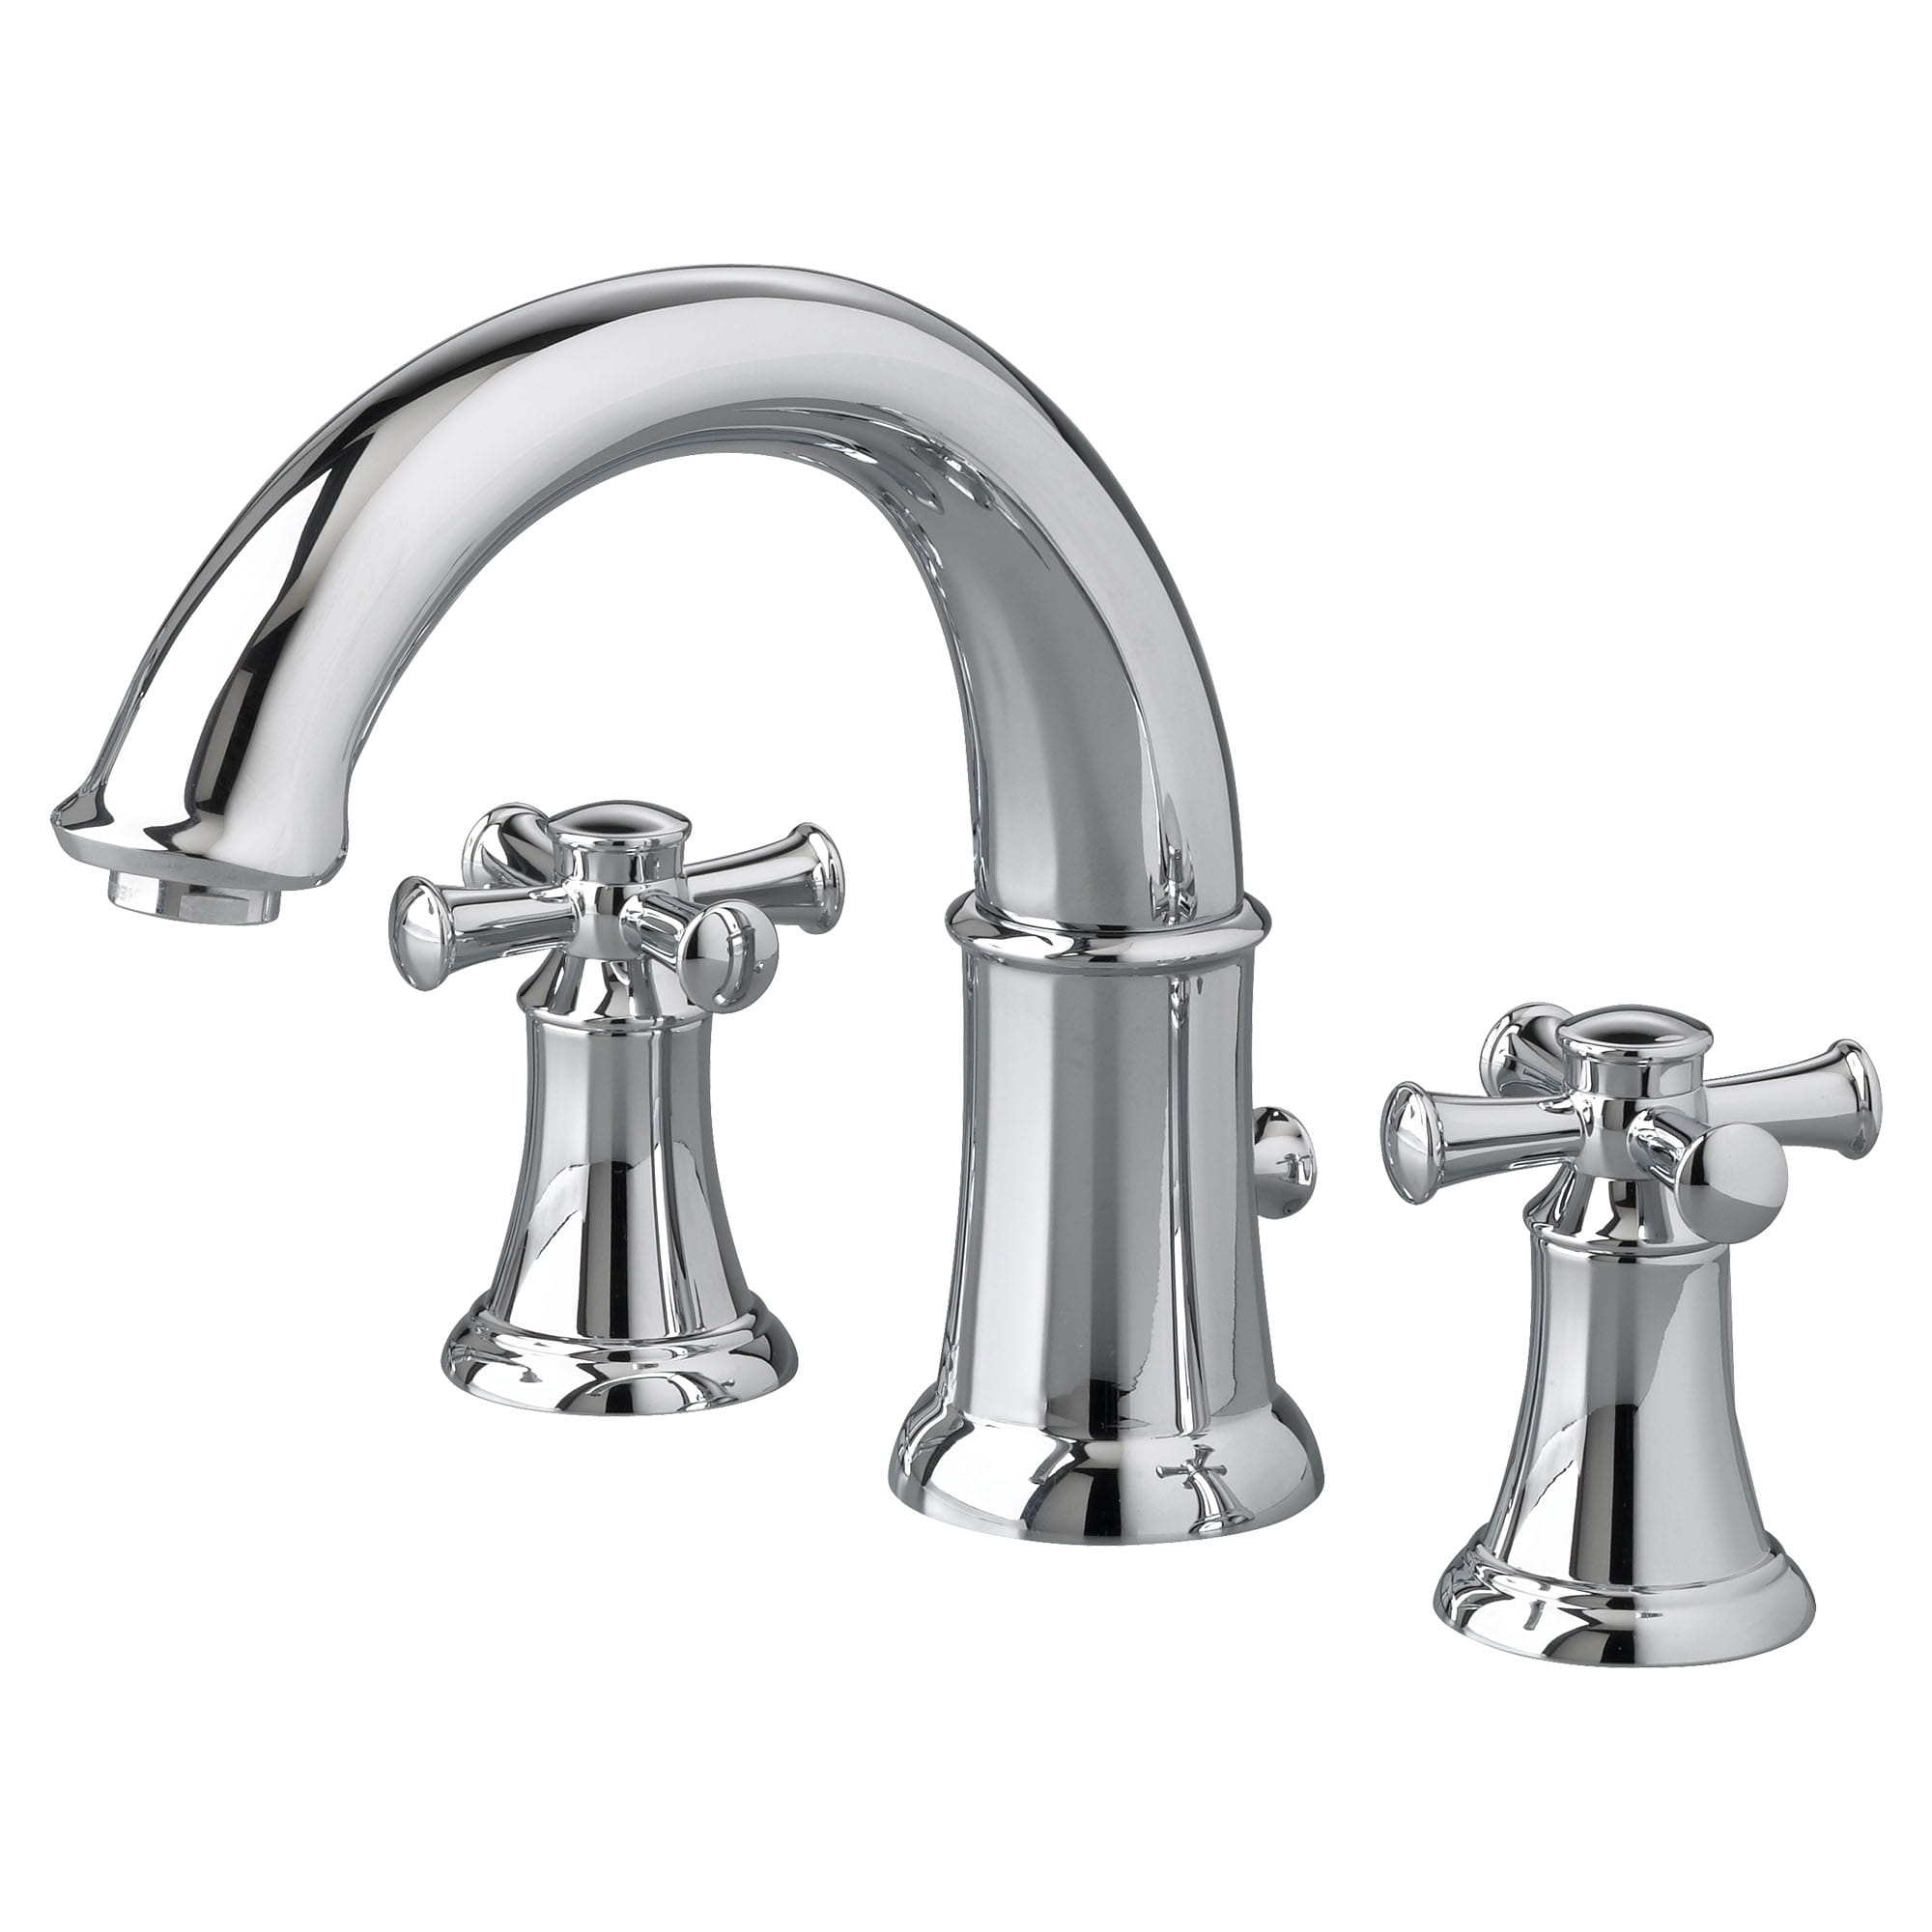 Portsmouth Bathtub Faucet for Flash Rough in Valve with Lever Handles CHROME